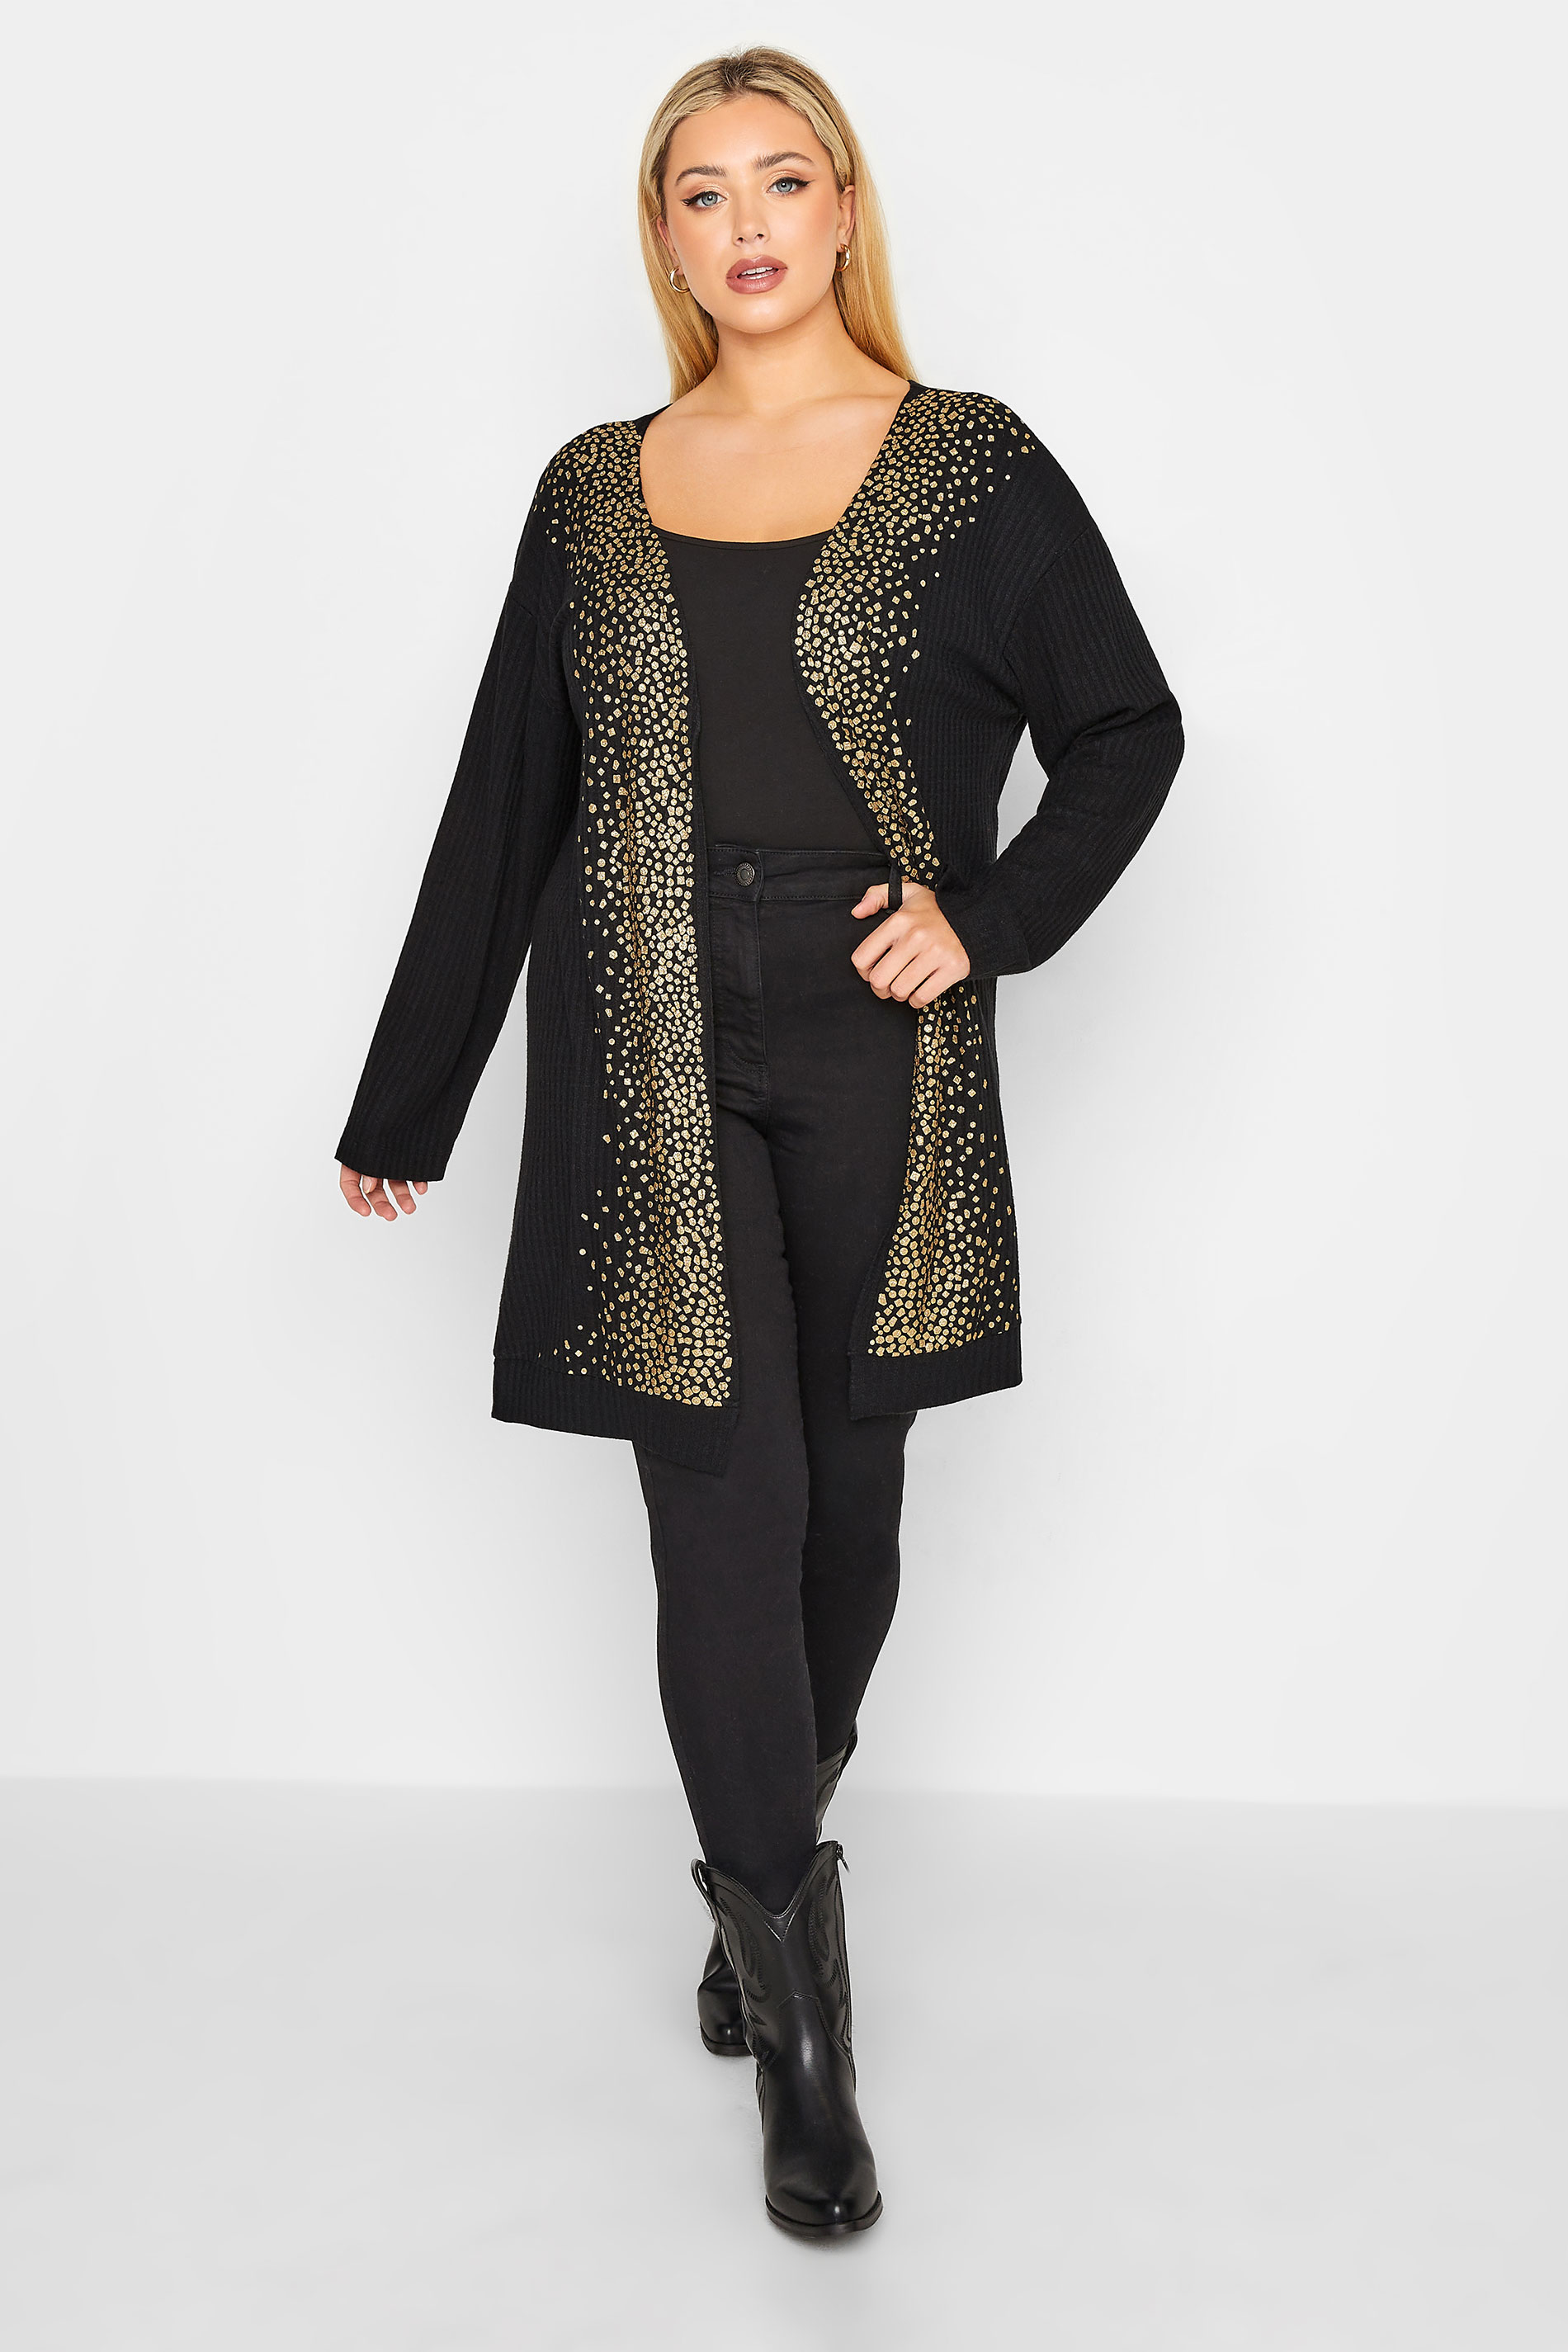 YOURS LUXURY Plus Size Curve Black & Gold Glitter Soft Touch Cardigan | Yours Clothing  3